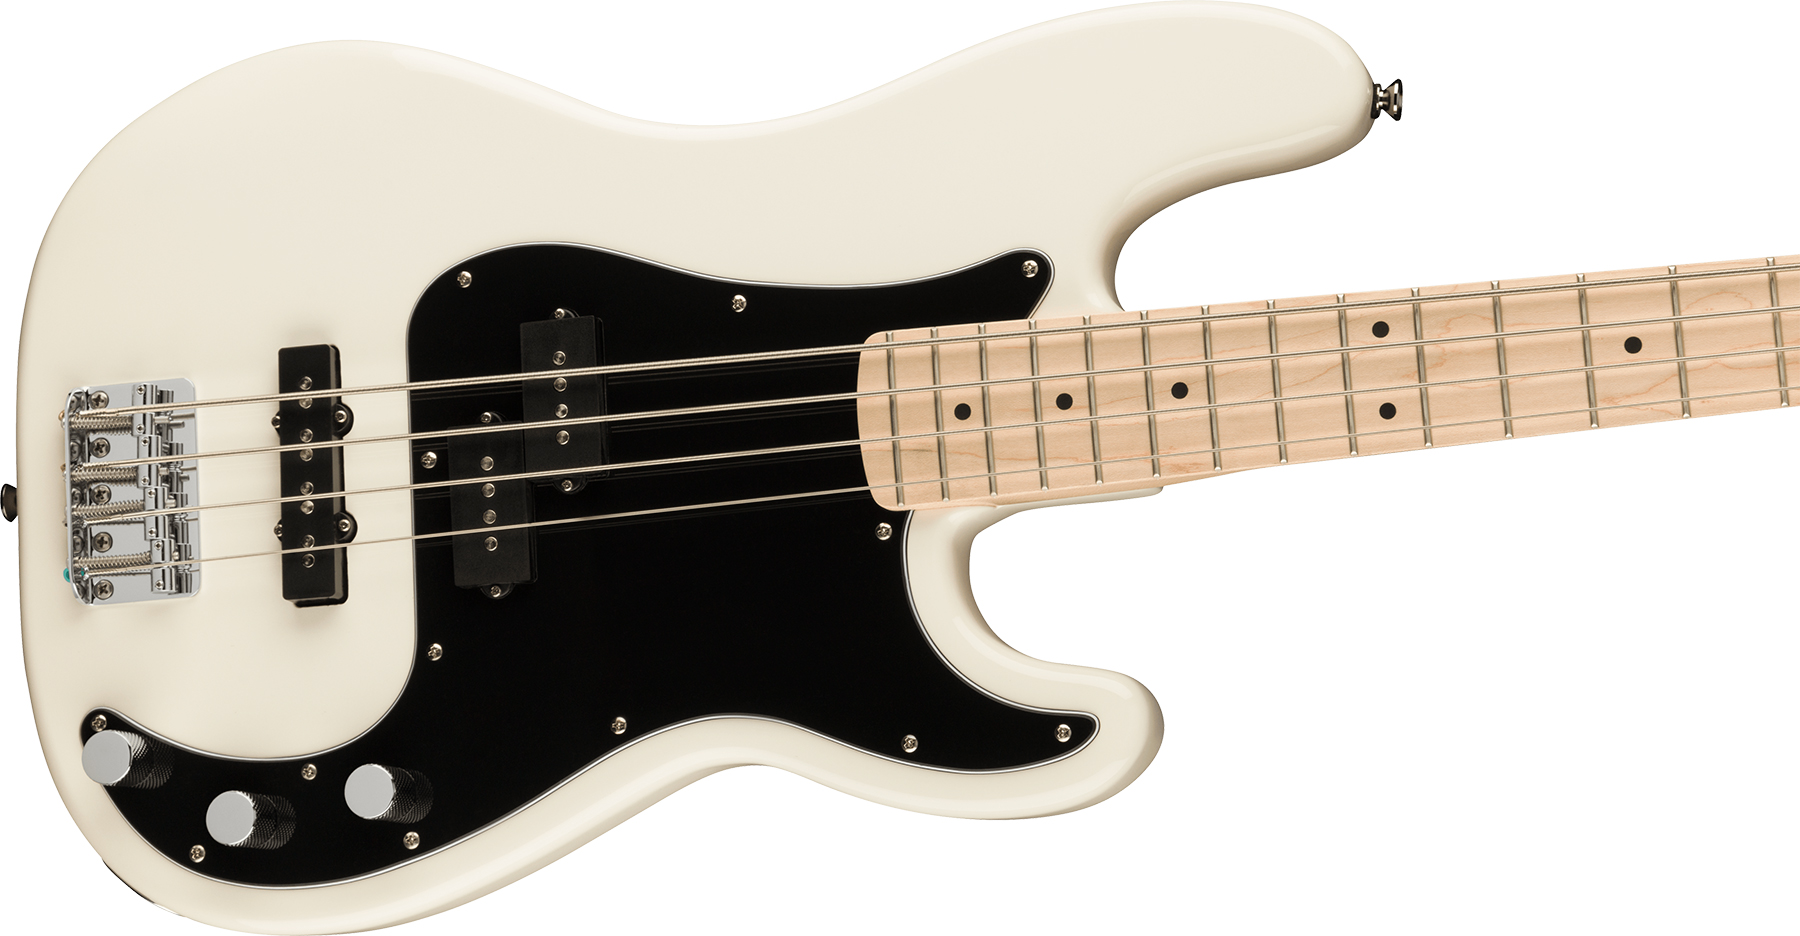 Squier Precision Bass Affinity Pj 2021 Mn - Olympic White - Basse Électrique Solid Body - Variation 2